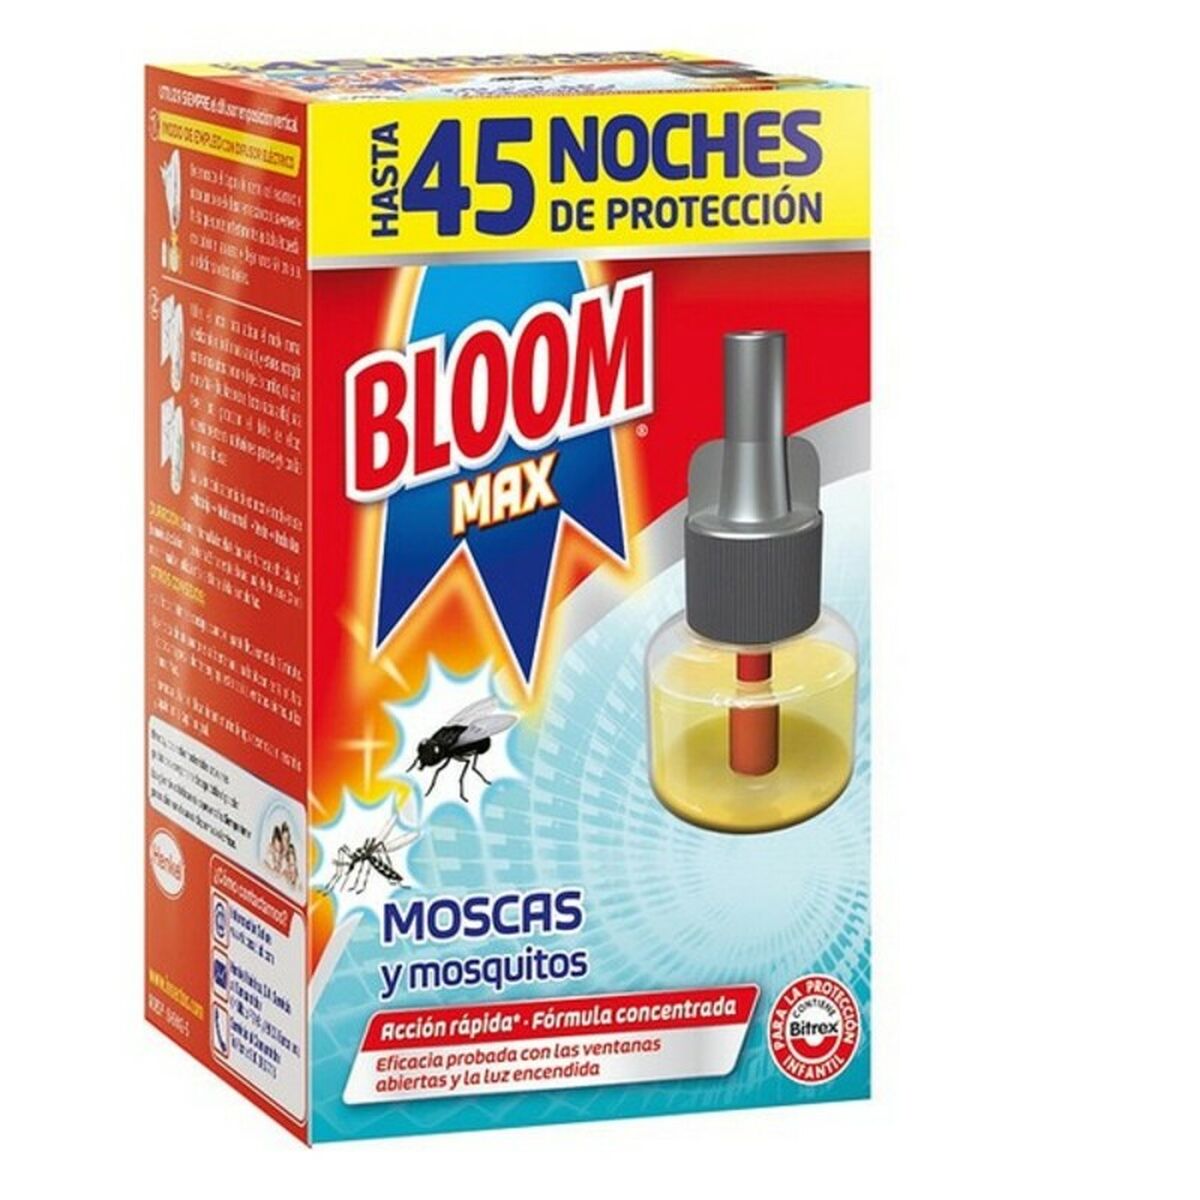 Electric Mosquito Repellent Bloom Bloom Max Moscas Mosquitos 45 Nights 1 Unit 18 ml